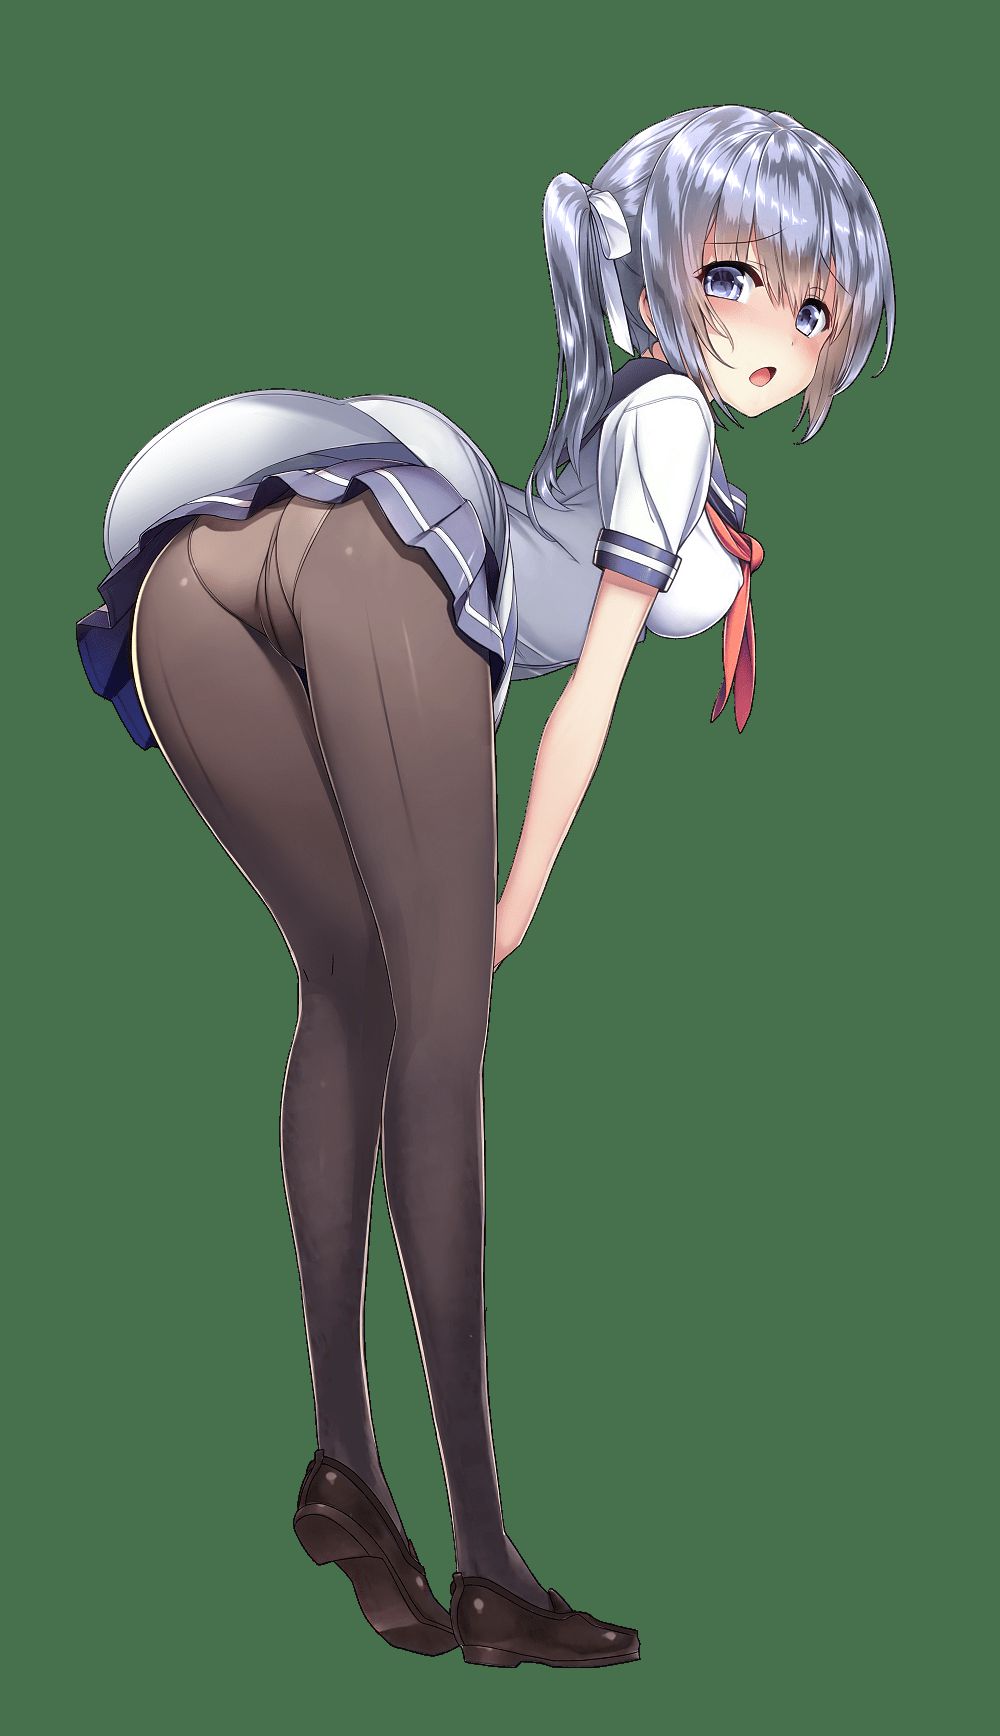 [Anime character material] png erotic images of animated characters part 44 22